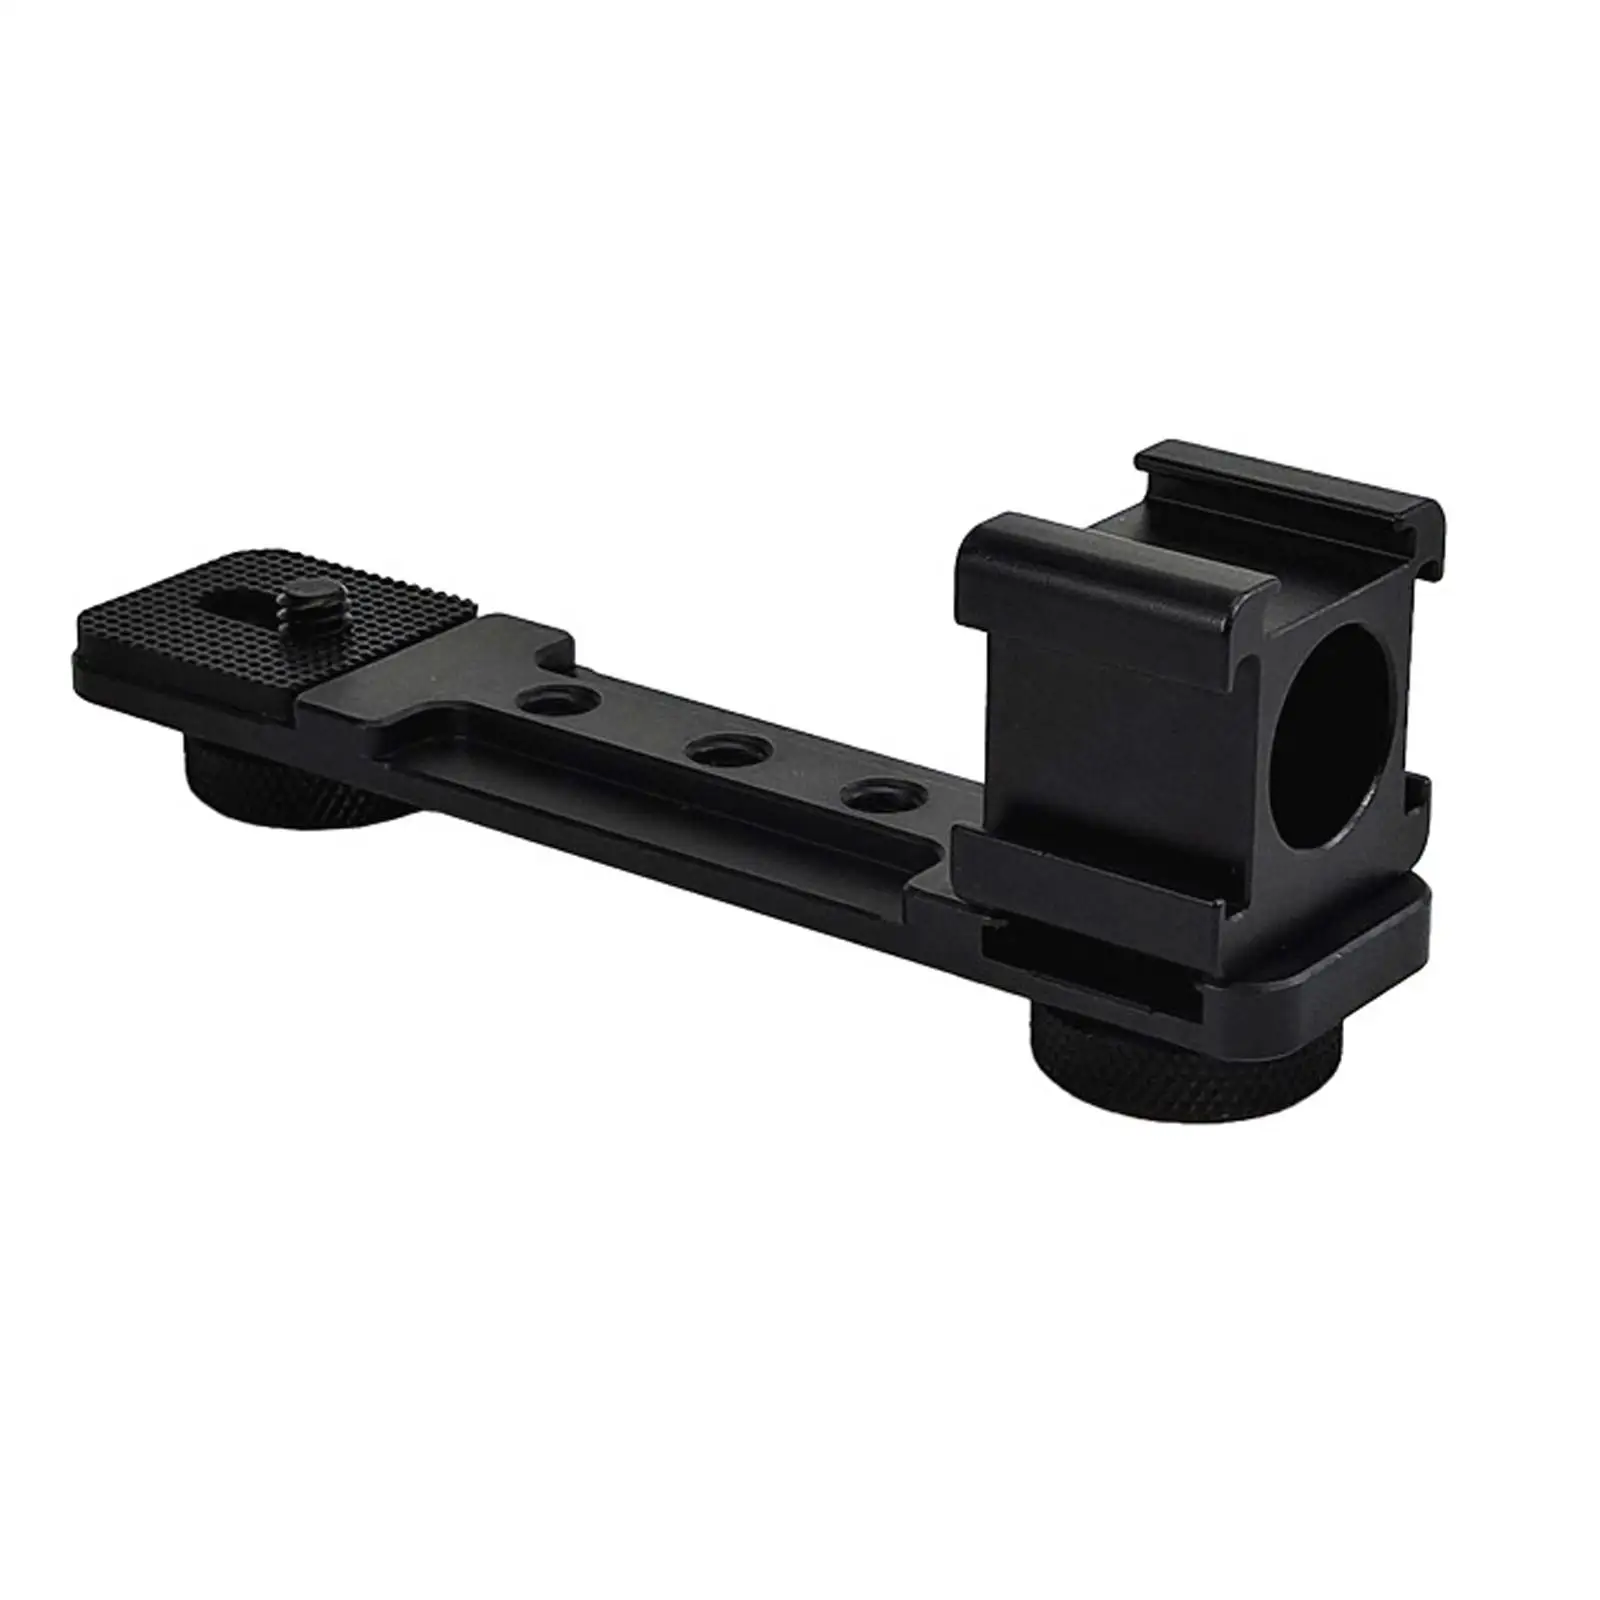 3 Sided Cold Shoe Mount Gimbal Stabilizer Video Light Microphone Mount 1/4`` Screw Solid Built Triple Cold Shoe Mount Bracket